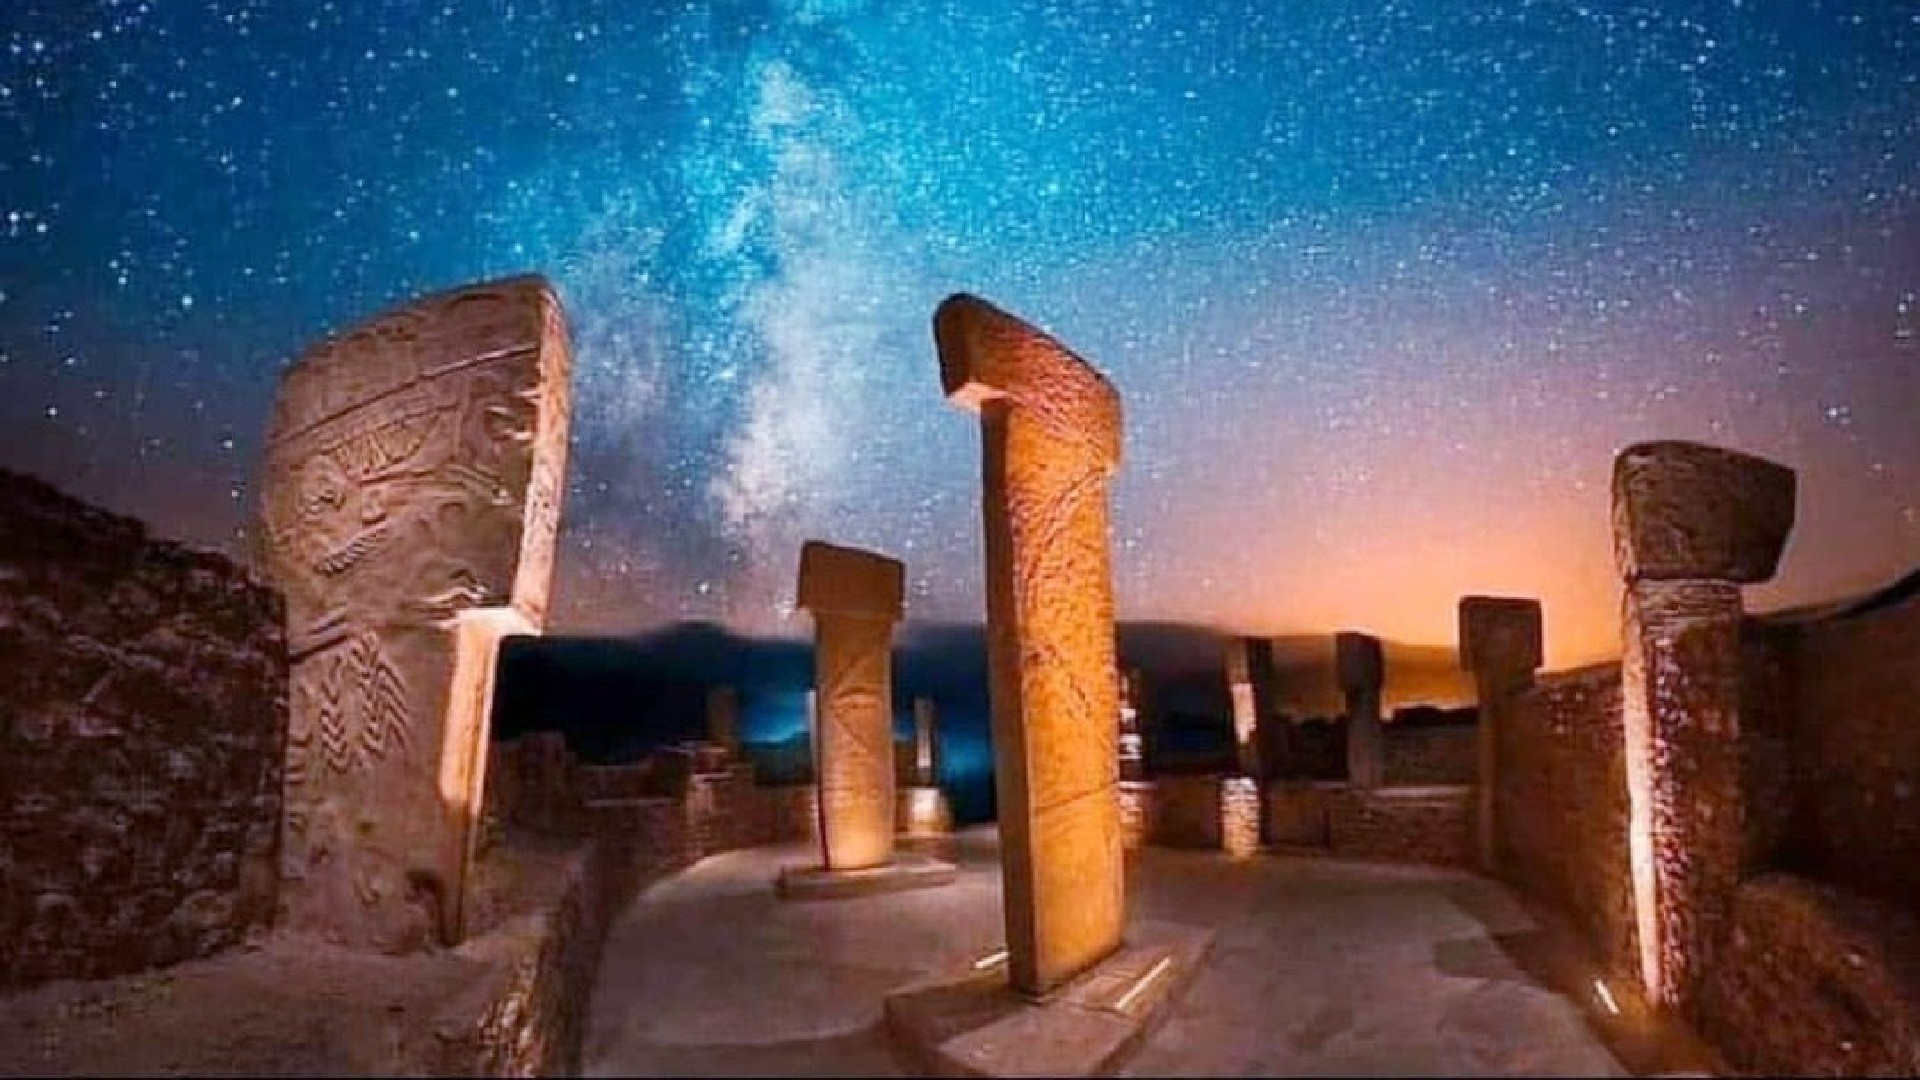 göbekli tepe temple: One of the oldest temples in Turkey